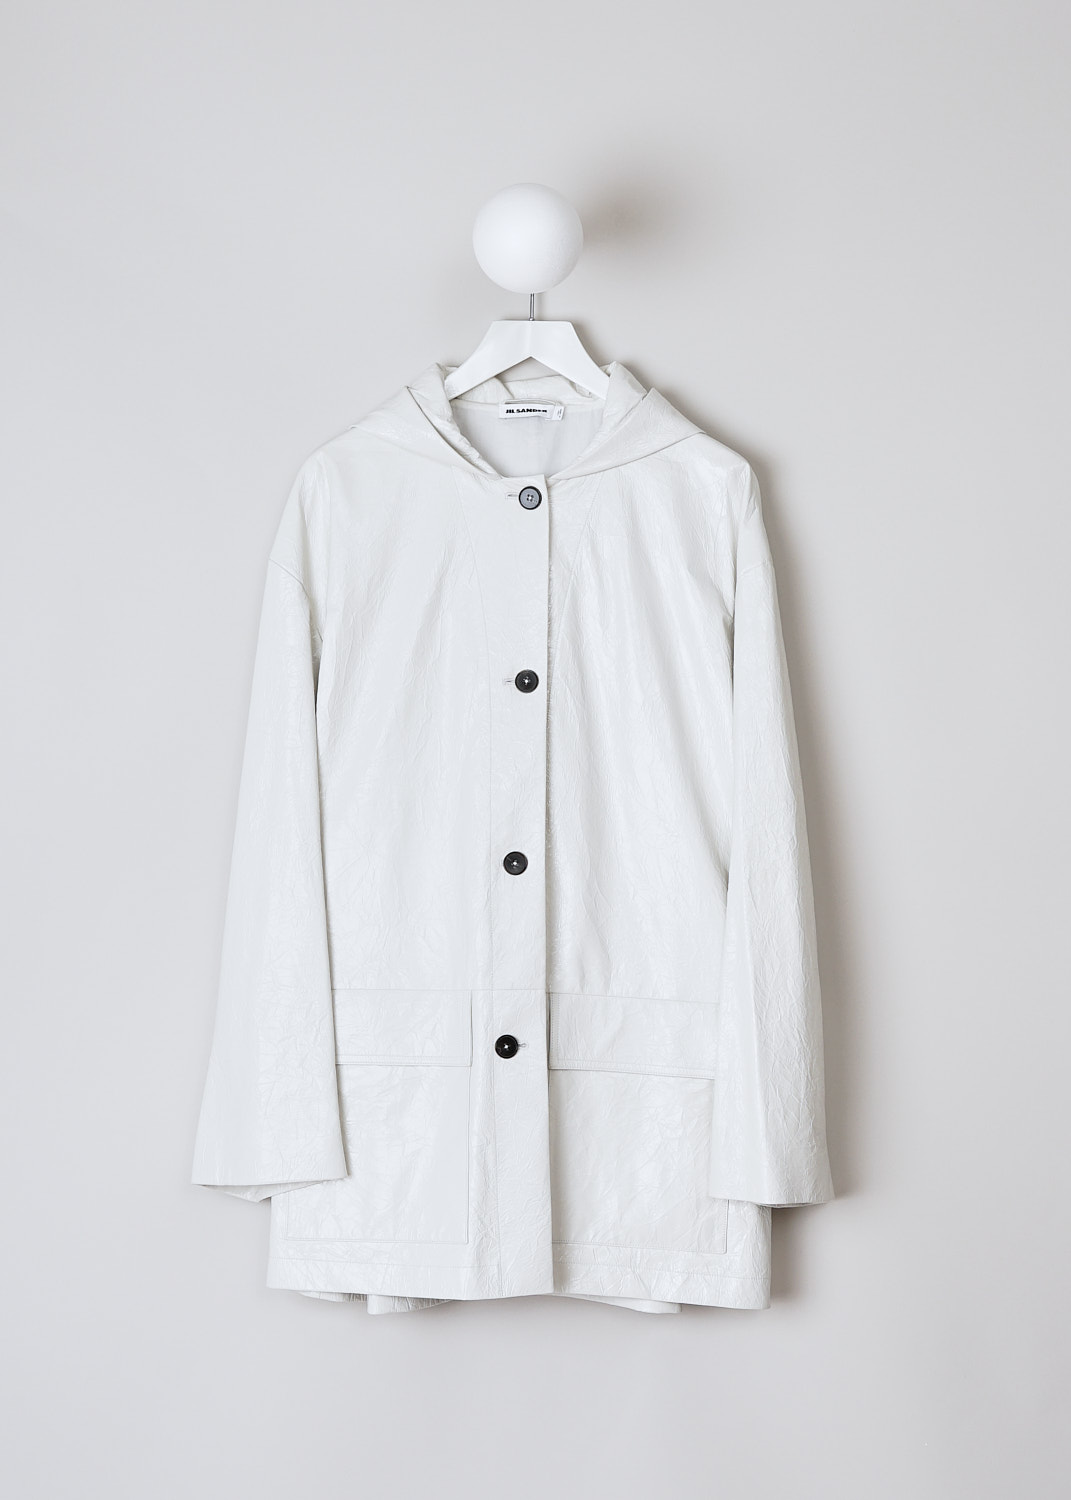 JIL SANDER, WHITE CRACKLED LEATHER COAT WITH HOOD, JSPN654170_WNL00080_105, White, Front, This hooded coat is made of a off-white crackled leather. The coat has a front button closure with brown buttons. On the front, the coat has two flap patch pockets. The coat has a straight hemline.  
